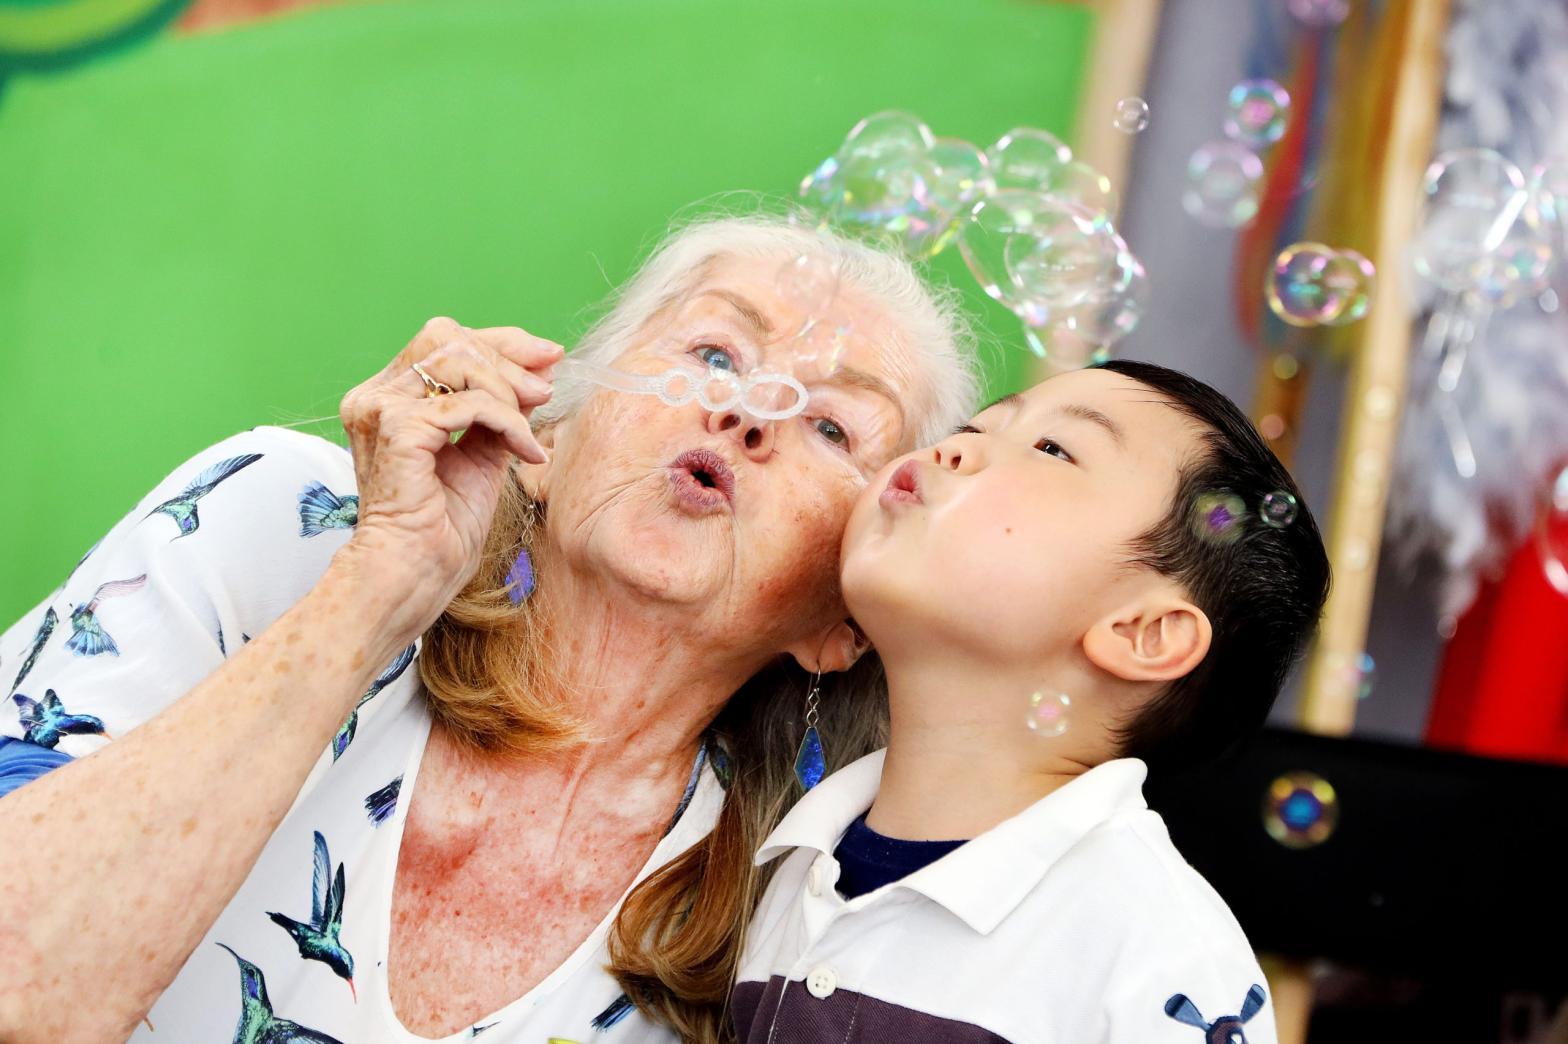 5 Life Lessons from ABC's Old People's Home for 4 Year Olds